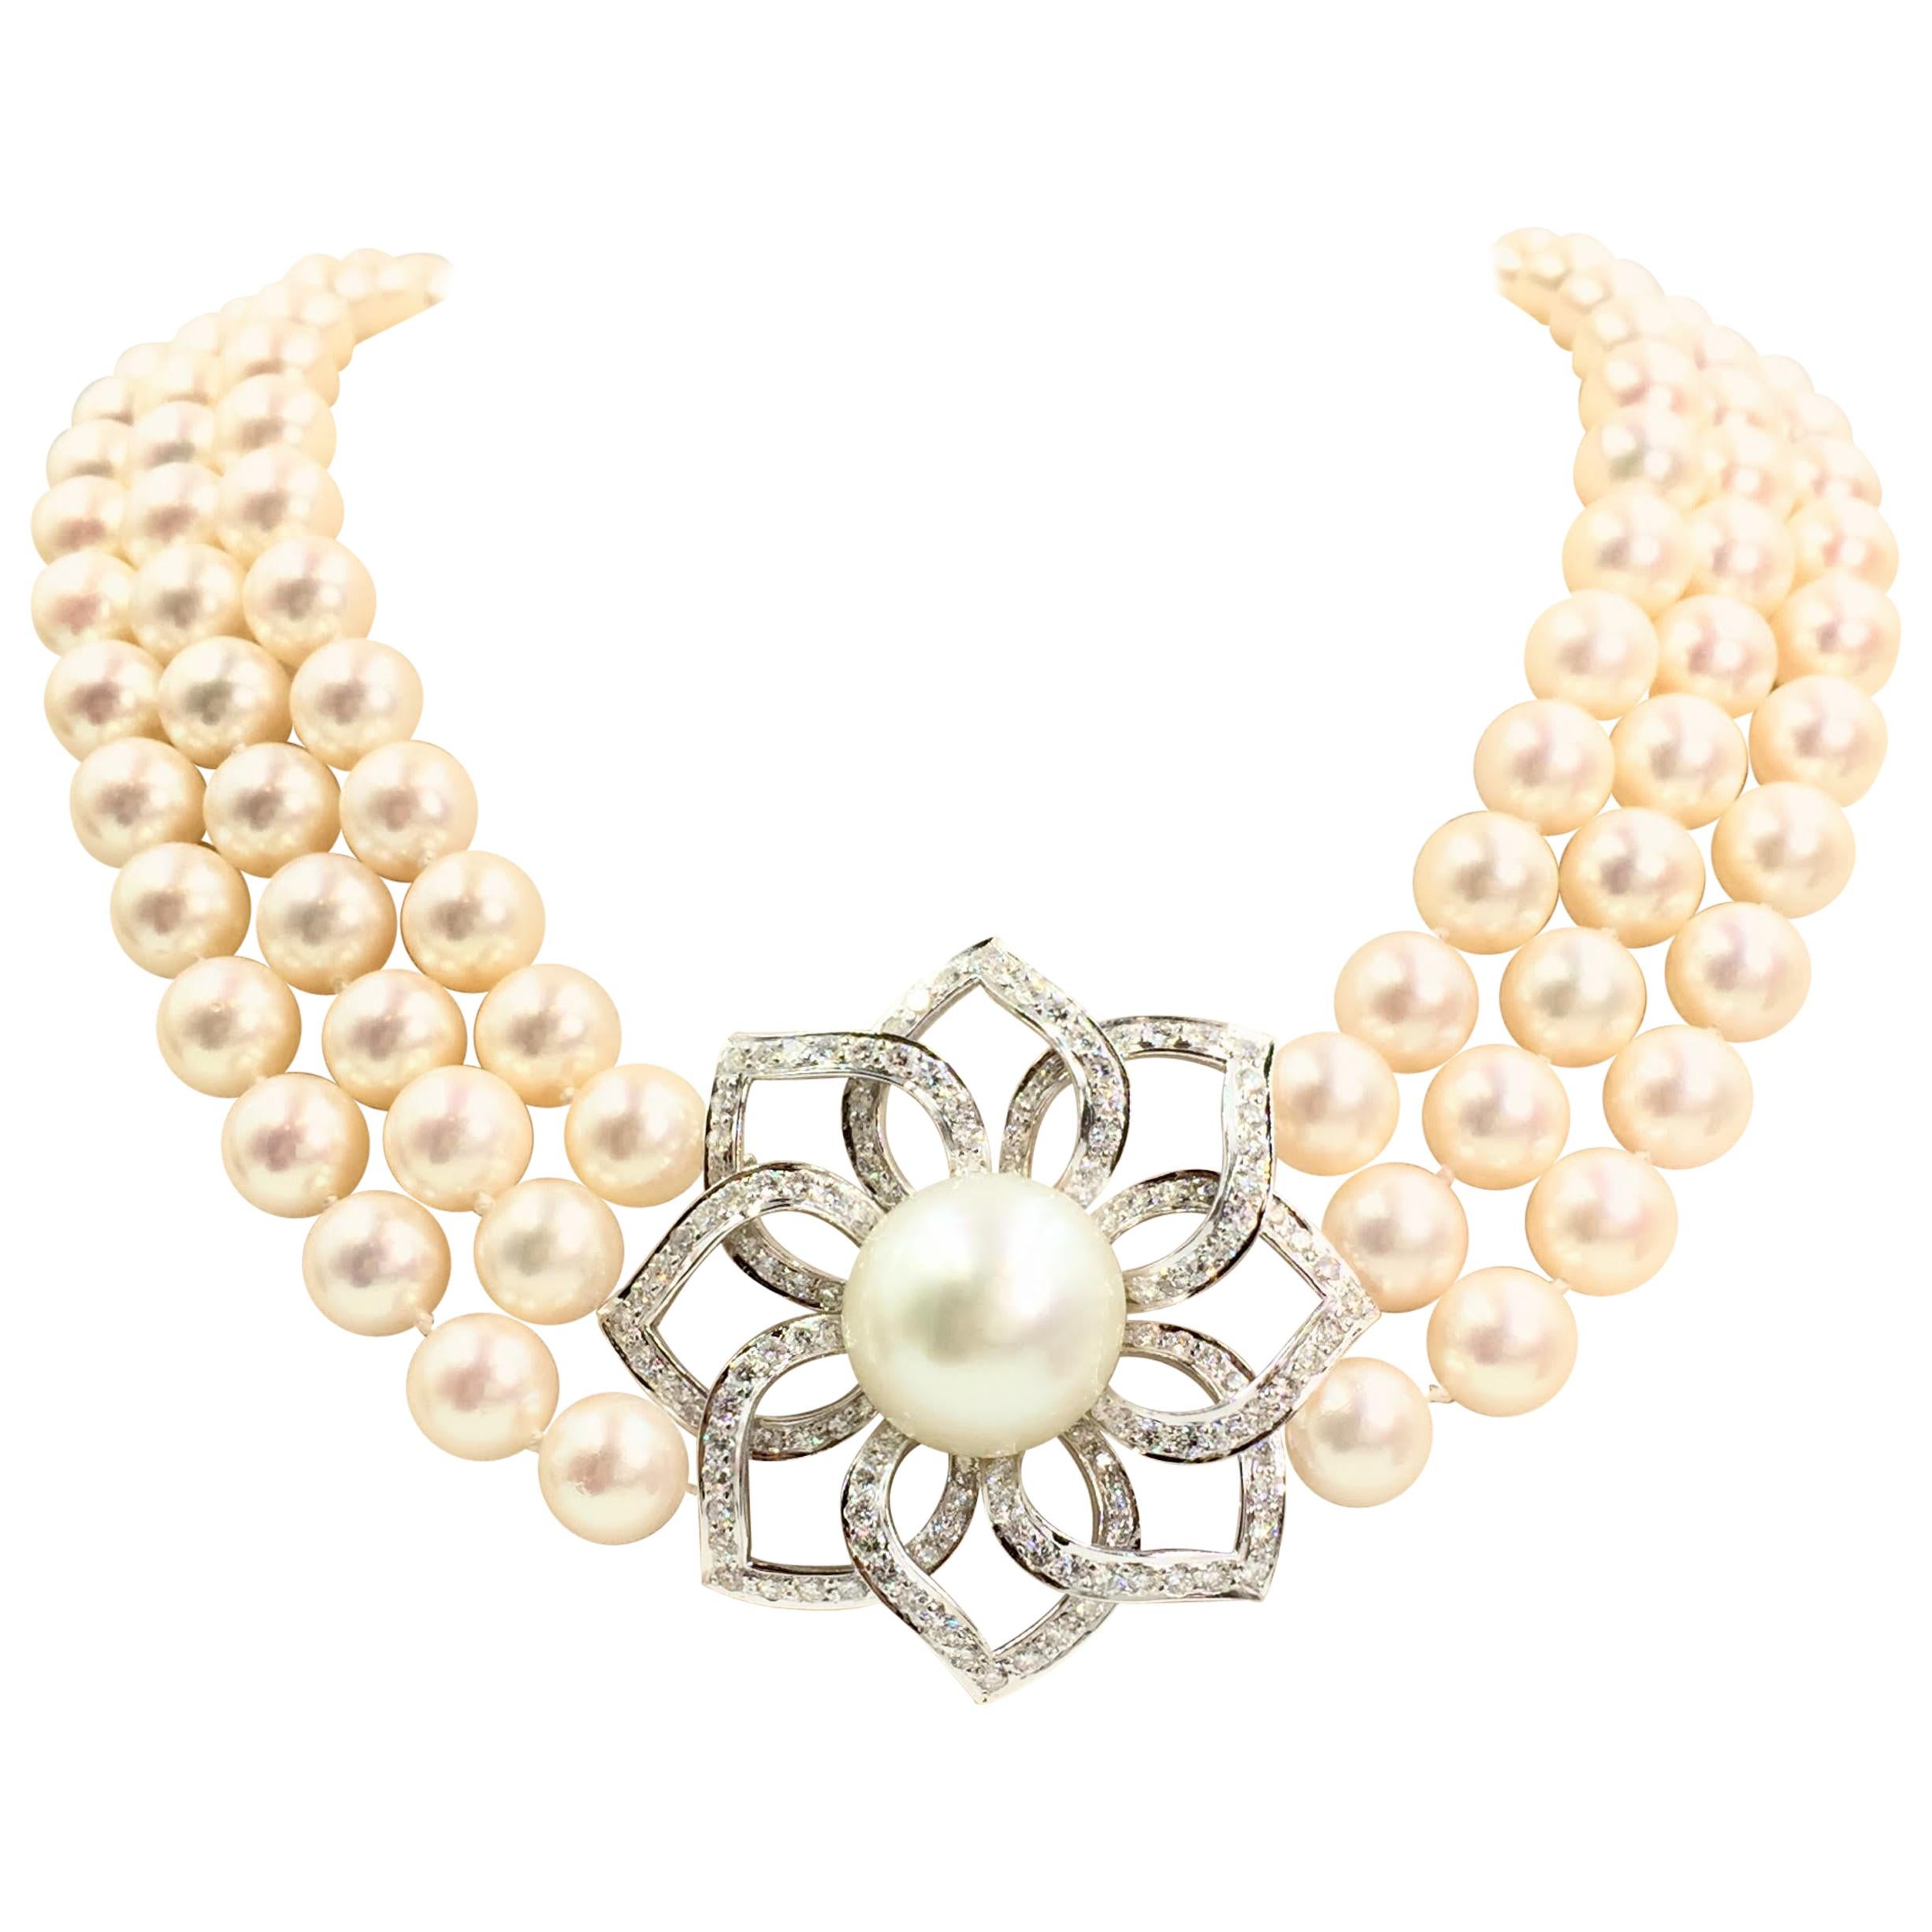 18 Karat Triple Strand Pearl Necklace with Diamond and South Sea Pearl Pendant